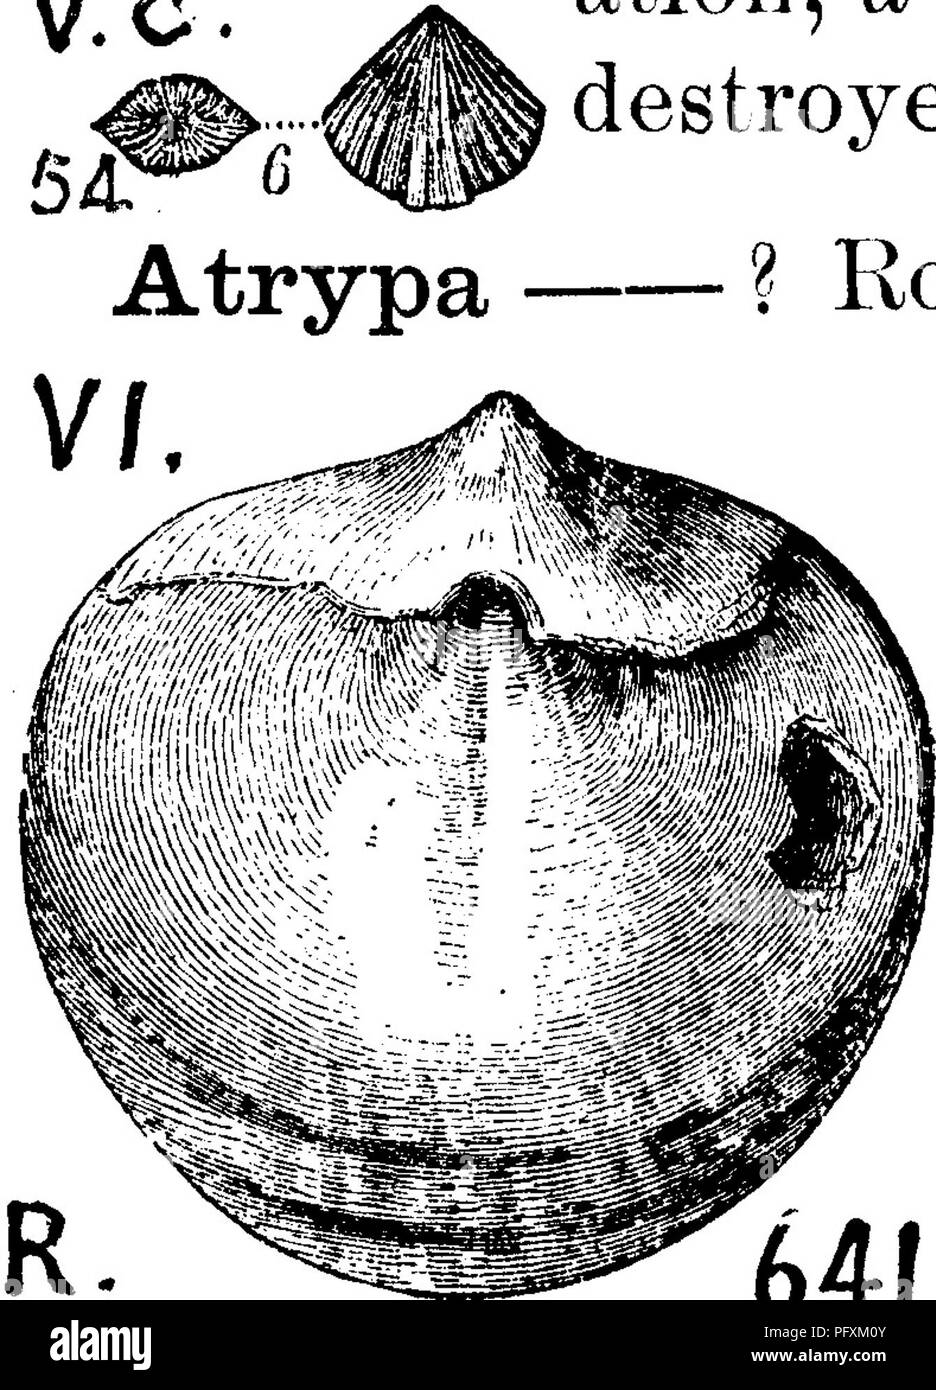 . A dictionary of the fossils of Pennsylvania and neighboring states named in the reports and catalogues of the survey ... Paleontology. 61 Atry. lection, (000.) One specimen {Atrypa prisca) of it, well preserved, got at 1200' beneath the surface, in boring the Co- burn well at Fredonia, was given to Mr. Carll, (Rt. Ill,p. 153). Atrypa rostrata. See Meristella rostrata. VIIIc. Atrypa rugosa. See Rhynchonella rugosa. F5. Atrypa scitula. See Meristella scitula. VIII a. Atrypa singularis. See Eatonia singularis. VI. Atrypa sordida. See Rhynchonella sordida. II c. Atrypa spinosa. See Atrypa aspera Stock Photo